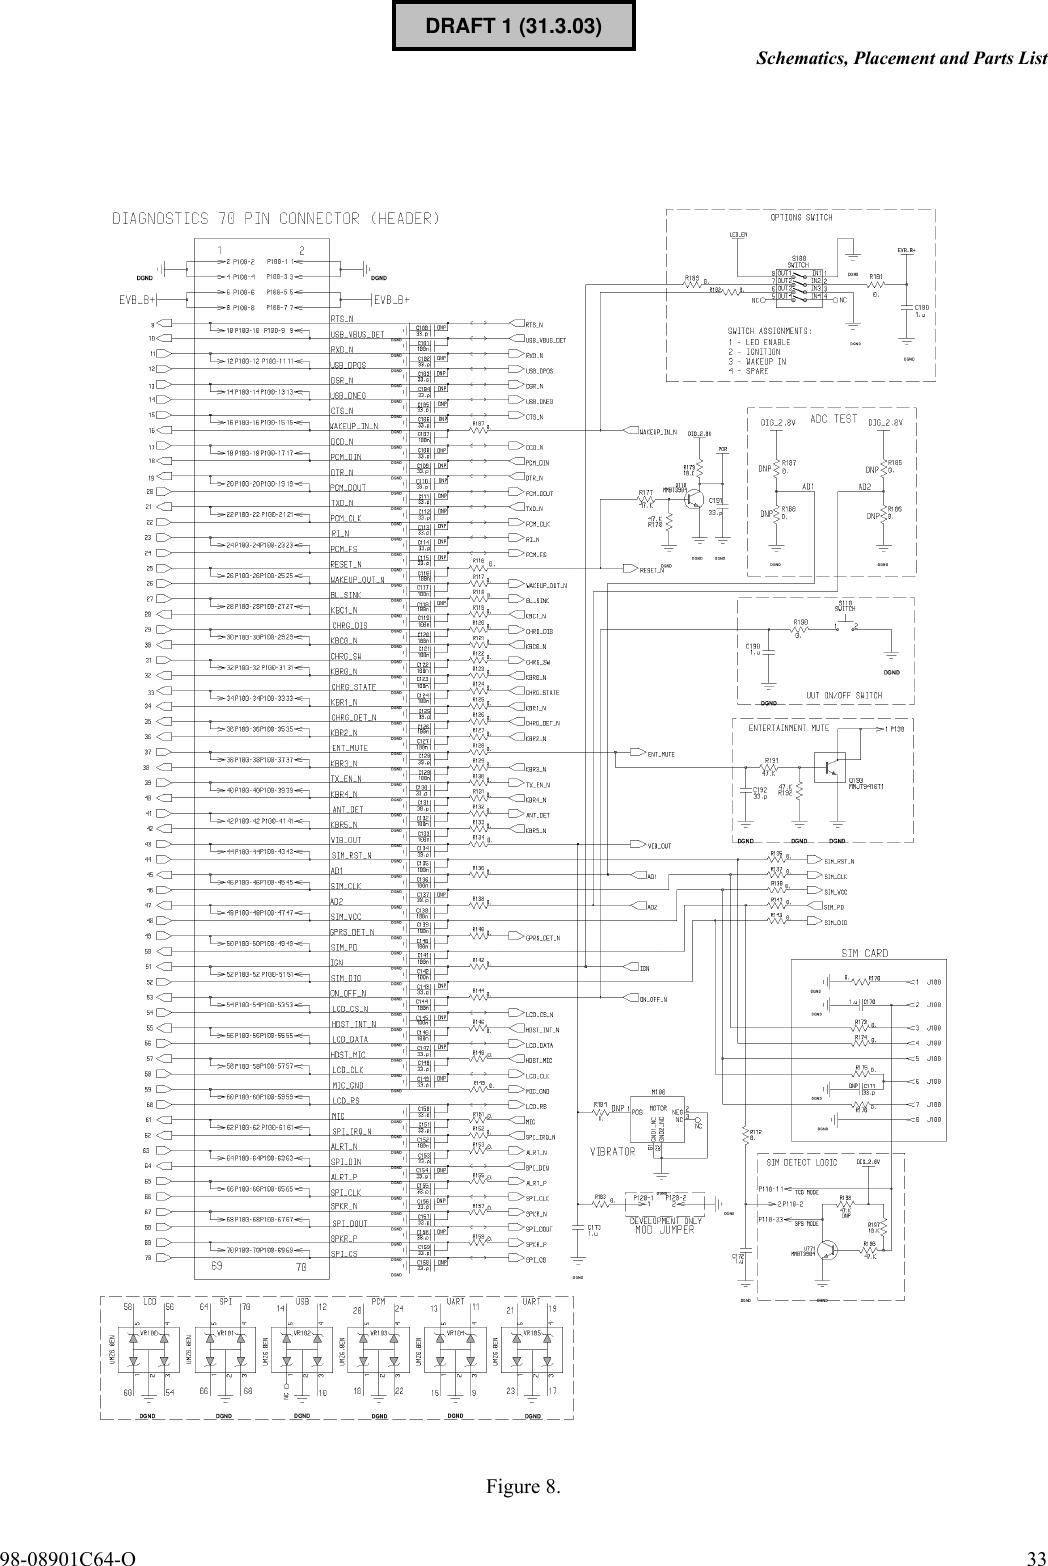 98-08901C64-O 33Schematics, Placement and Parts ListFigure 8.DRAFT 1 (31.3.03)